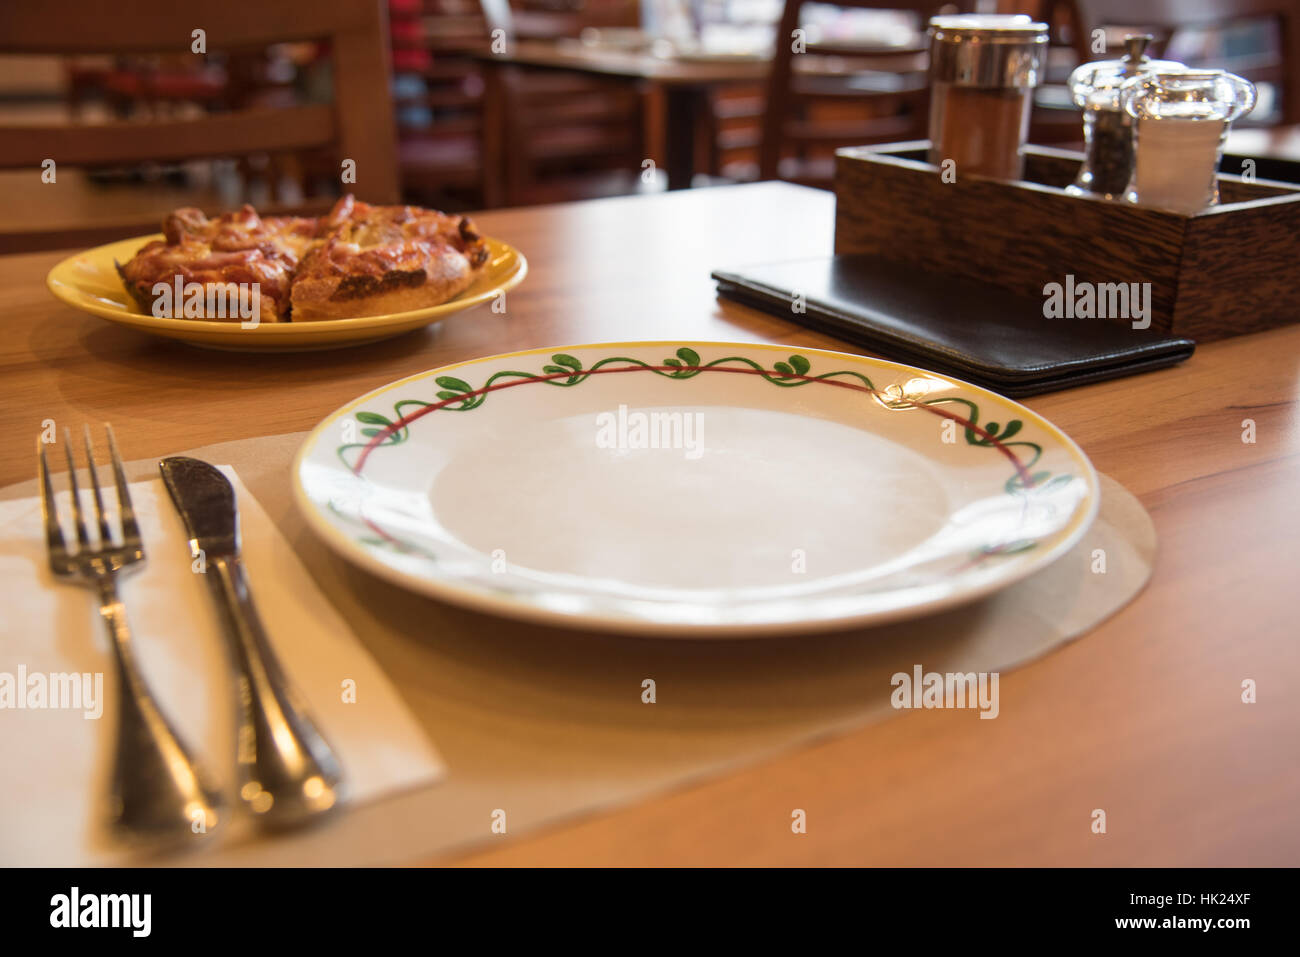 Selective Focus On Dish On Restaurant Wooden Table With Tableware, Seasoning Bottles Stock Photo